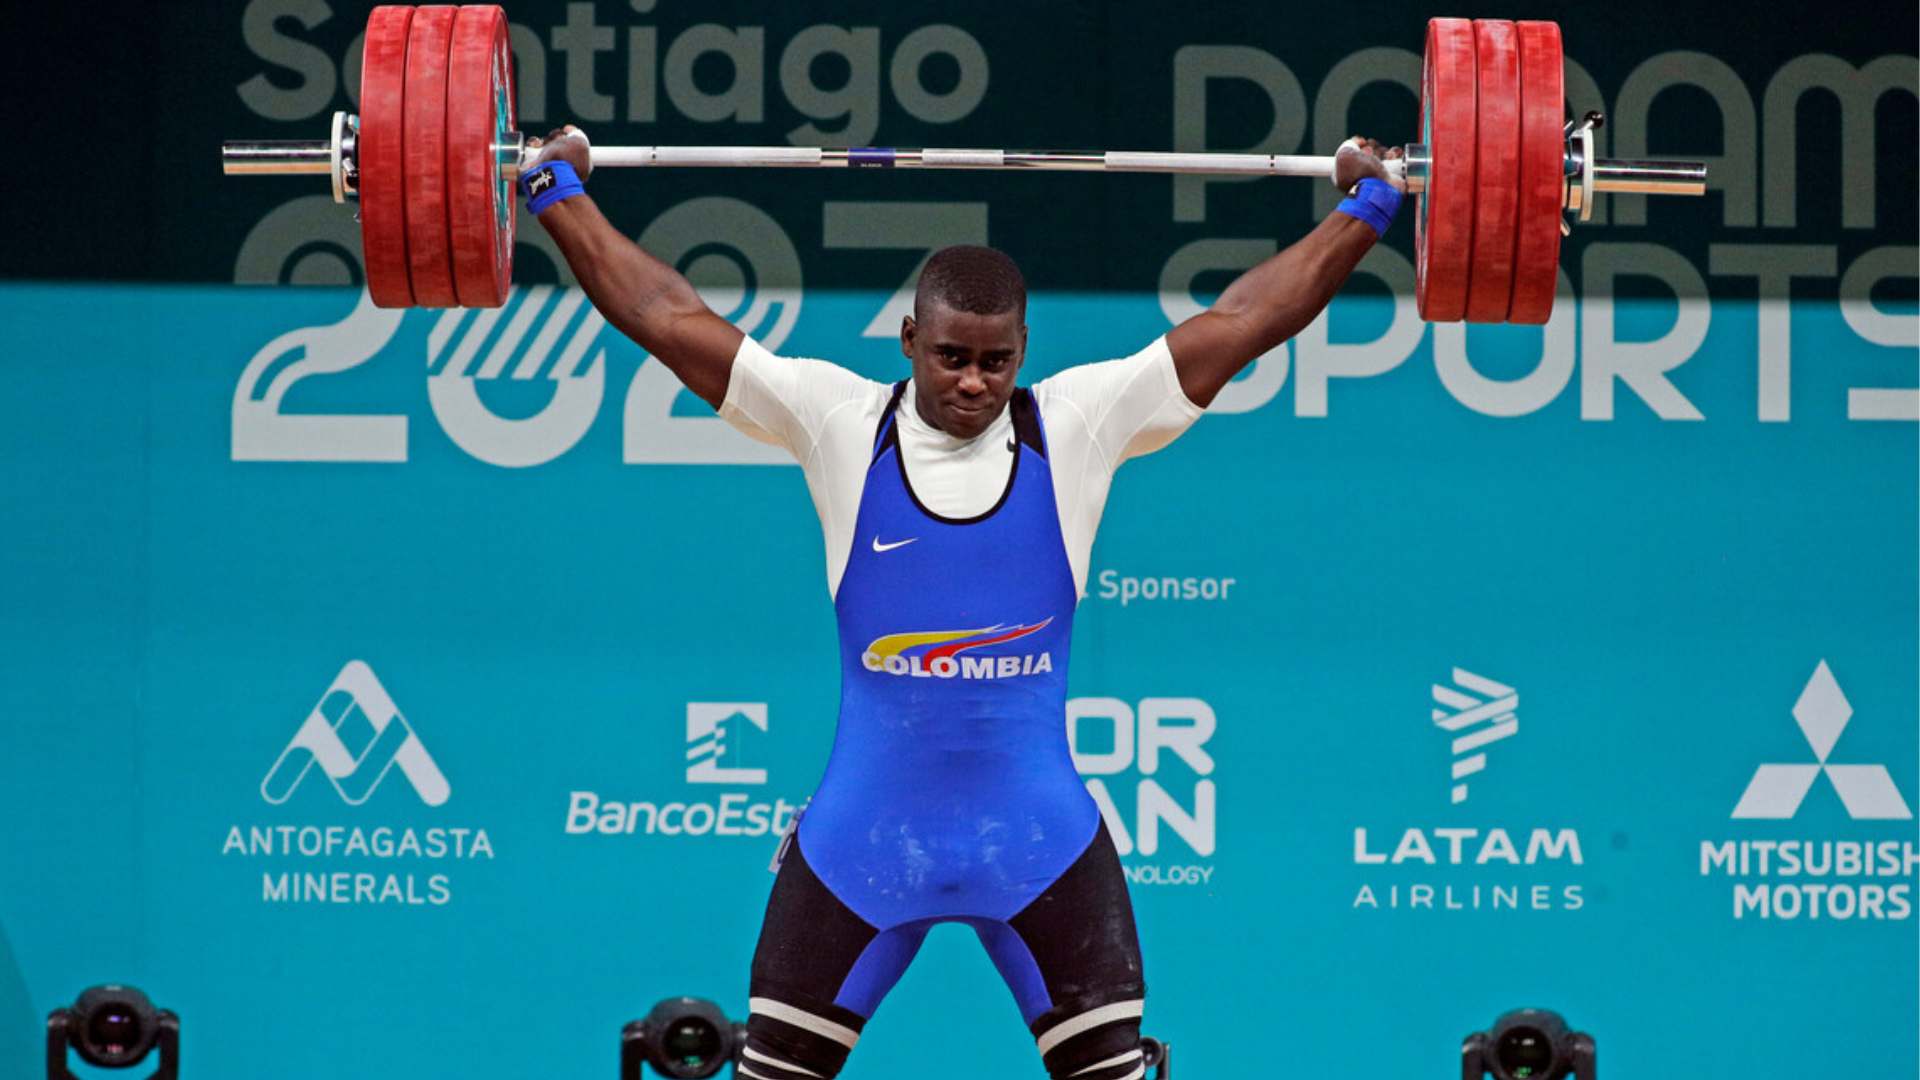 Colombia celebrates in Pan American Weightlifting thanks to Jhonatan Rivas